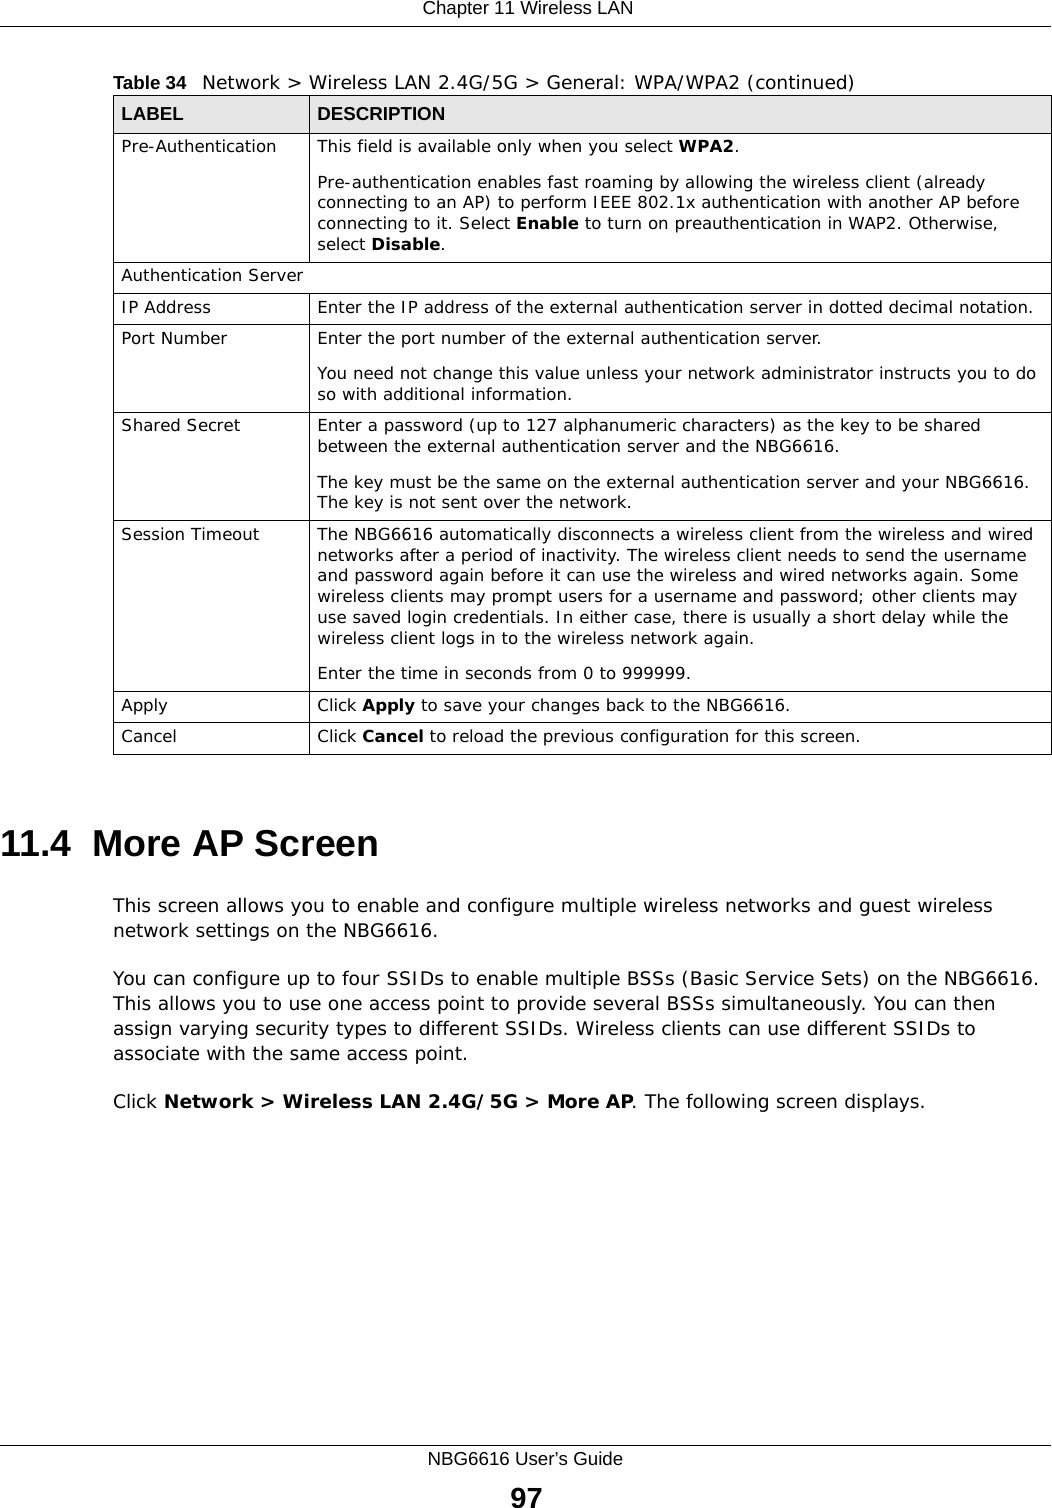  Chapter 11 Wireless LANNBG6616 User’s Guide9711.4  More AP Screen This screen allows you to enable and configure multiple wireless networks and guest wireless network settings on the NBG6616.You can configure up to four SSIDs to enable multiple BSSs (Basic Service Sets) on the NBG6616. This allows you to use one access point to provide several BSSs simultaneously. You can then assign varying security types to different SSIDs. Wireless clients can use different SSIDs to associate with the same access point.Click Network &gt; Wireless LAN 2.4G/5G &gt; More AP. The following screen displays.Pre-Authentication  This field is available only when you select WPA2.Pre-authentication enables fast roaming by allowing the wireless client (already connecting to an AP) to perform IEEE 802.1x authentication with another AP before connecting to it. Select Enable to turn on preauthentication in WAP2. Otherwise, select Disable.Authentication ServerIP Address Enter the IP address of the external authentication server in dotted decimal notation.Port Number Enter the port number of the external authentication server.  You need not change this value unless your network administrator instructs you to do so with additional information. Shared Secret Enter a password (up to 127 alphanumeric characters) as the key to be shared between the external authentication server and the NBG6616.The key must be the same on the external authentication server and your NBG6616. The key is not sent over the network. Session Timeout The NBG6616 automatically disconnects a wireless client from the wireless and wired networks after a period of inactivity. The wireless client needs to send the username and password again before it can use the wireless and wired networks again. Some wireless clients may prompt users for a username and password; other clients may use saved login credentials. In either case, there is usually a short delay while the wireless client logs in to the wireless network again.Enter the time in seconds from 0 to 999999.Apply Click Apply to save your changes back to the NBG6616.Cancel Click Cancel to reload the previous configuration for this screen.Table 34   Network &gt; Wireless LAN 2.4G/5G &gt; General: WPA/WPA2 (continued)LABEL DESCRIPTION